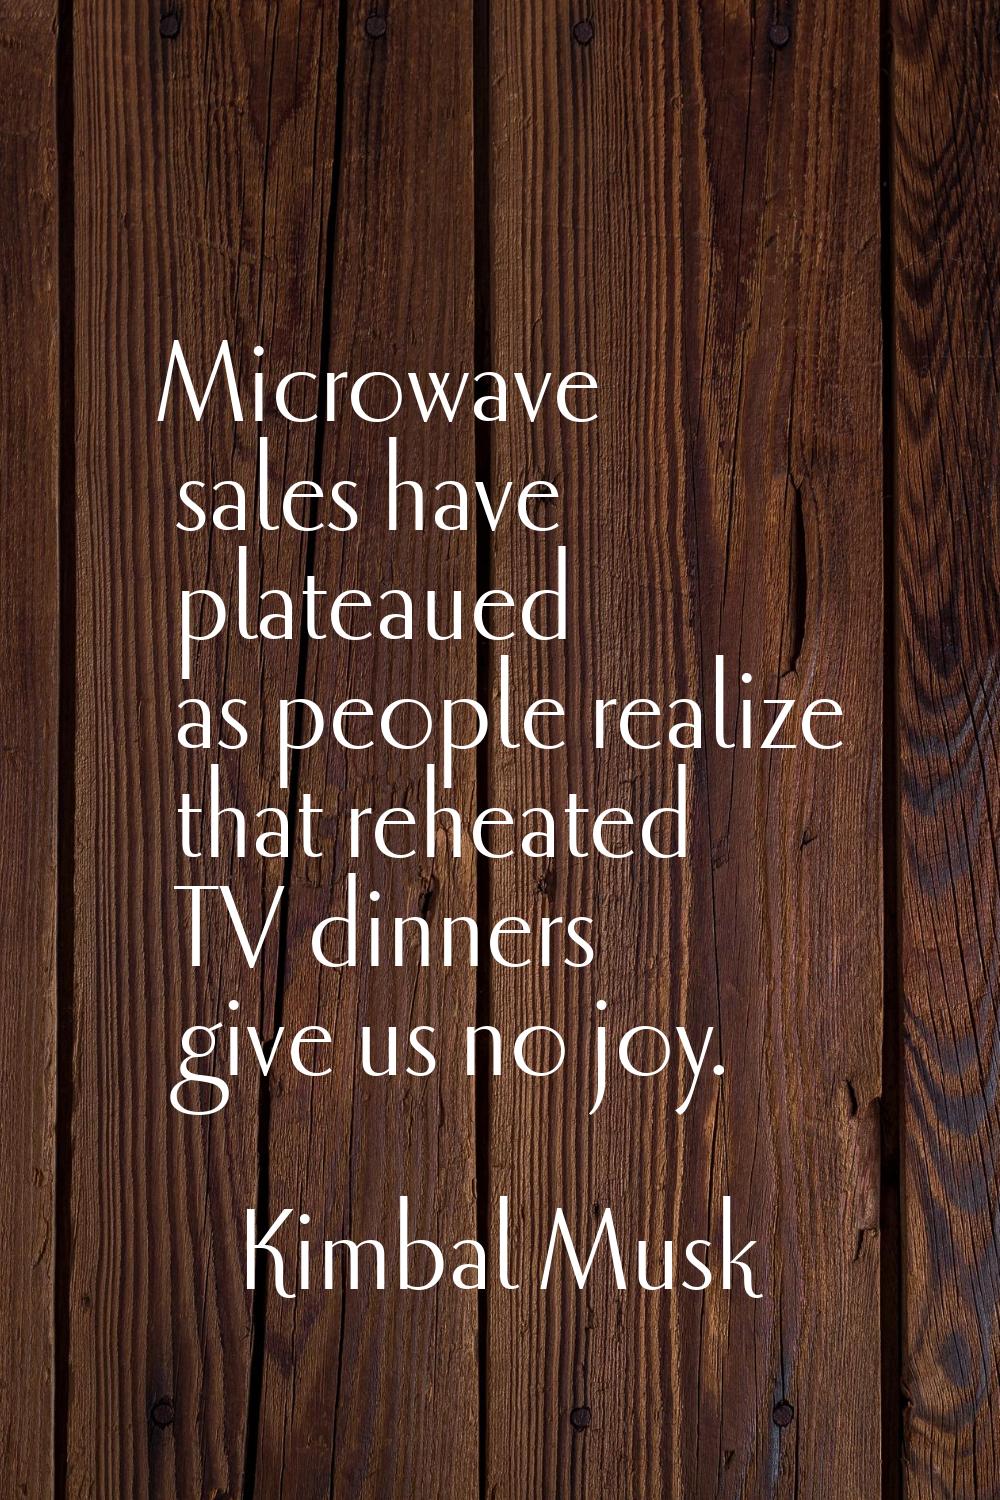 Microwave sales have plateaued as people realize that reheated TV dinners give us no joy.